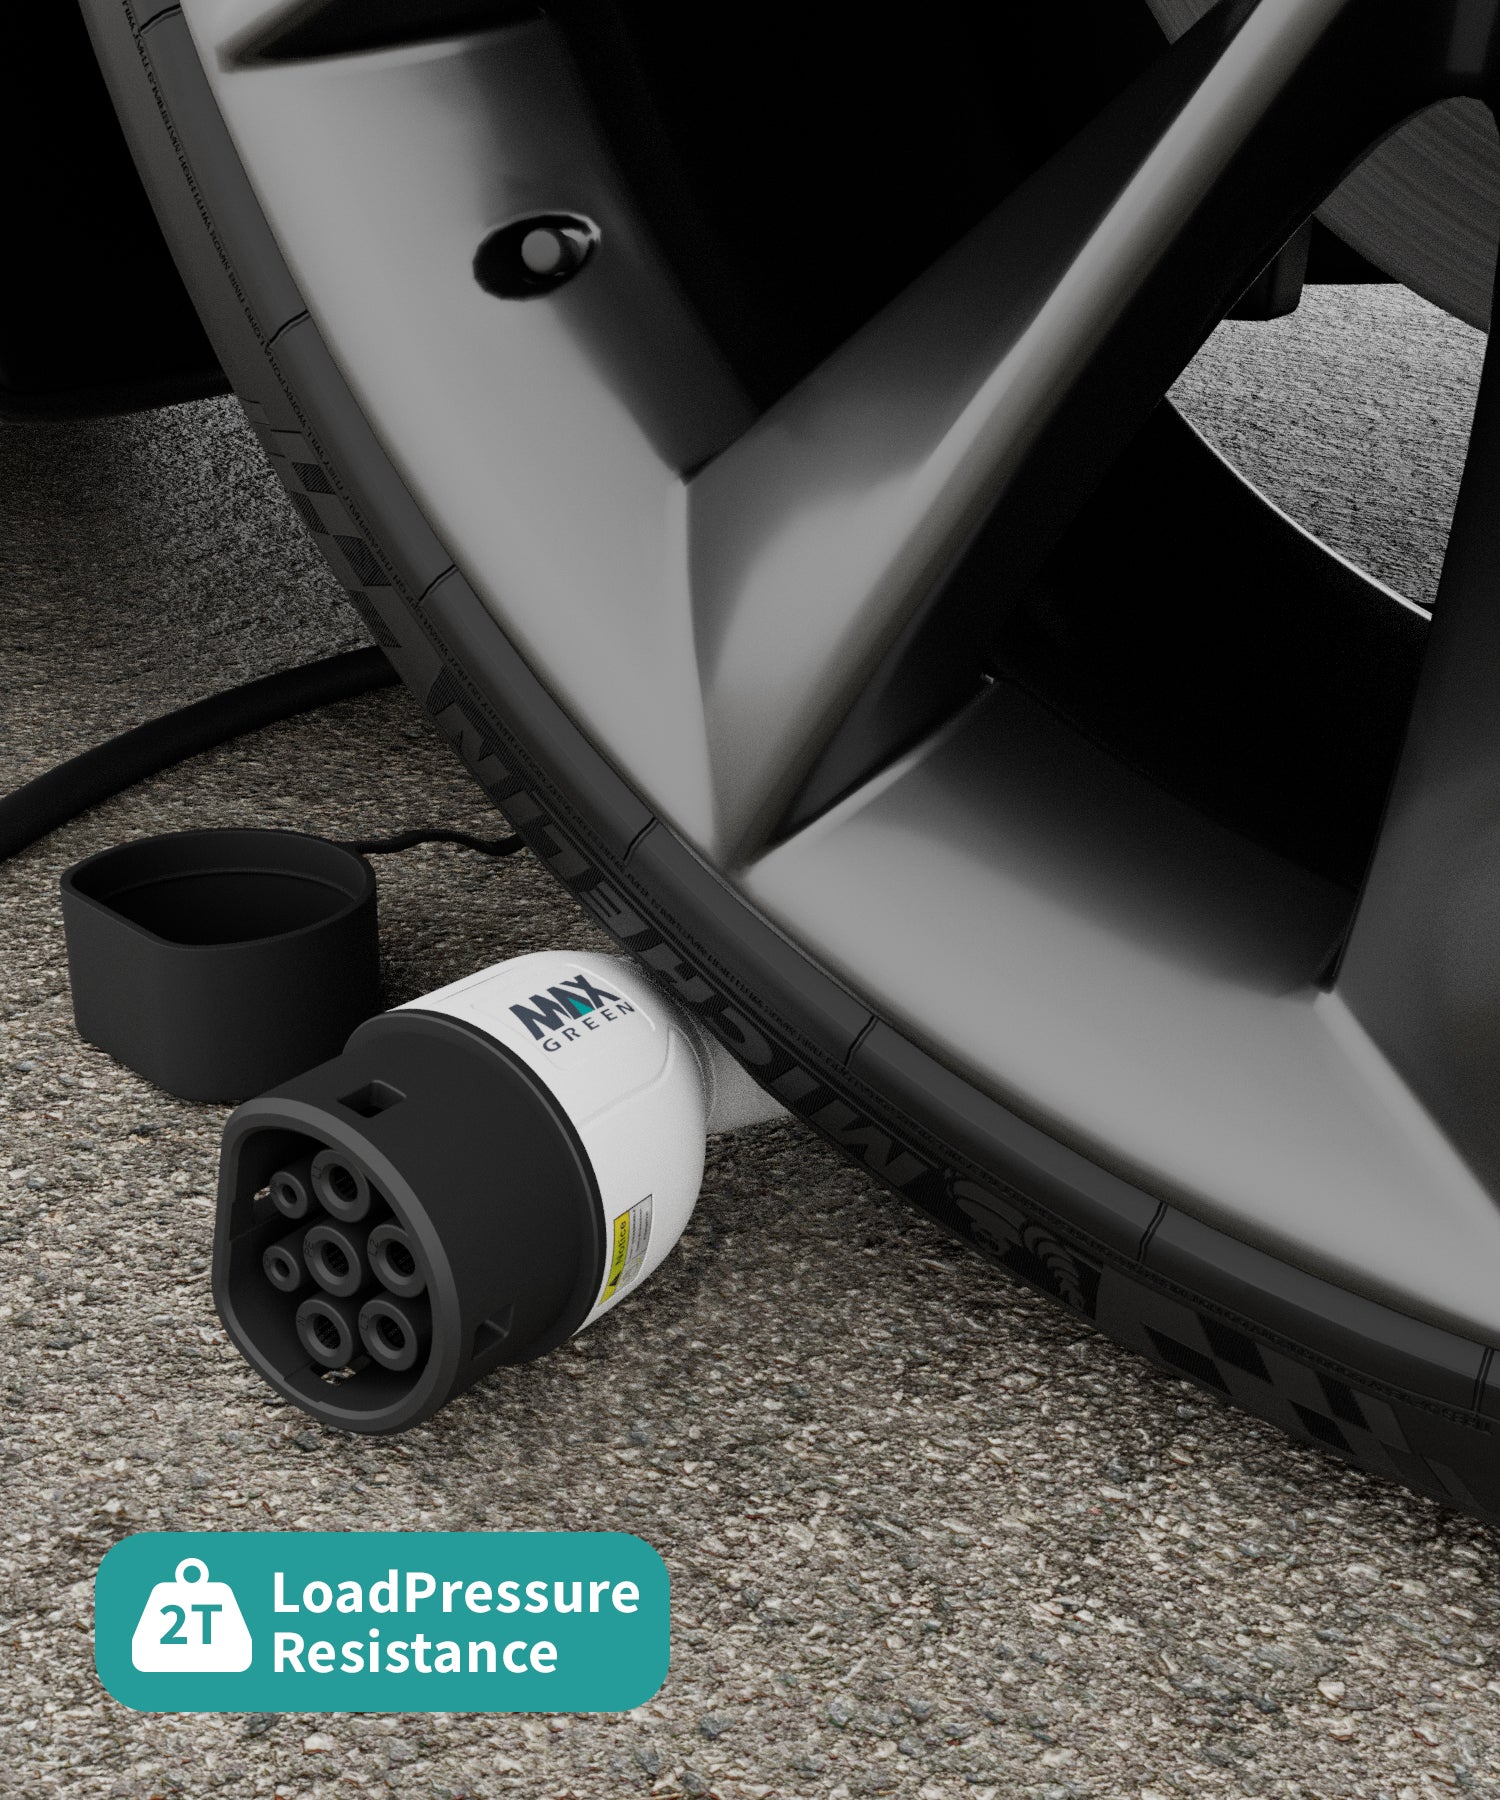 Maxgreen Type 2 to Type 2 EV charging cable is built tough for daily use, boasting exceptional durability and impact resistance.